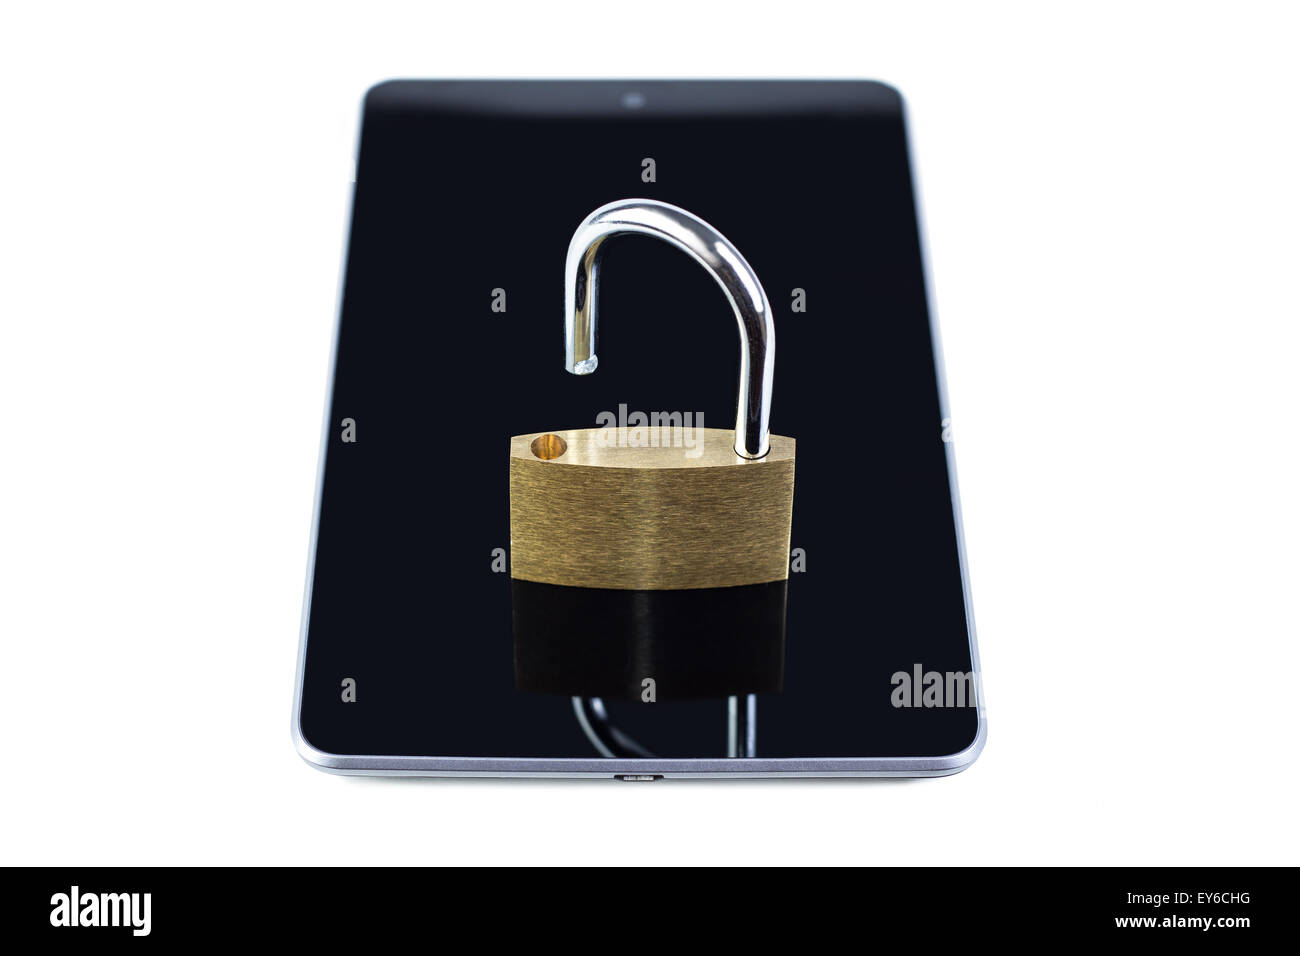 Unlocked padlock on tablet computer. Isolated on white background. Concept photo of technology, mobile&tablet computer security. Stock Photo